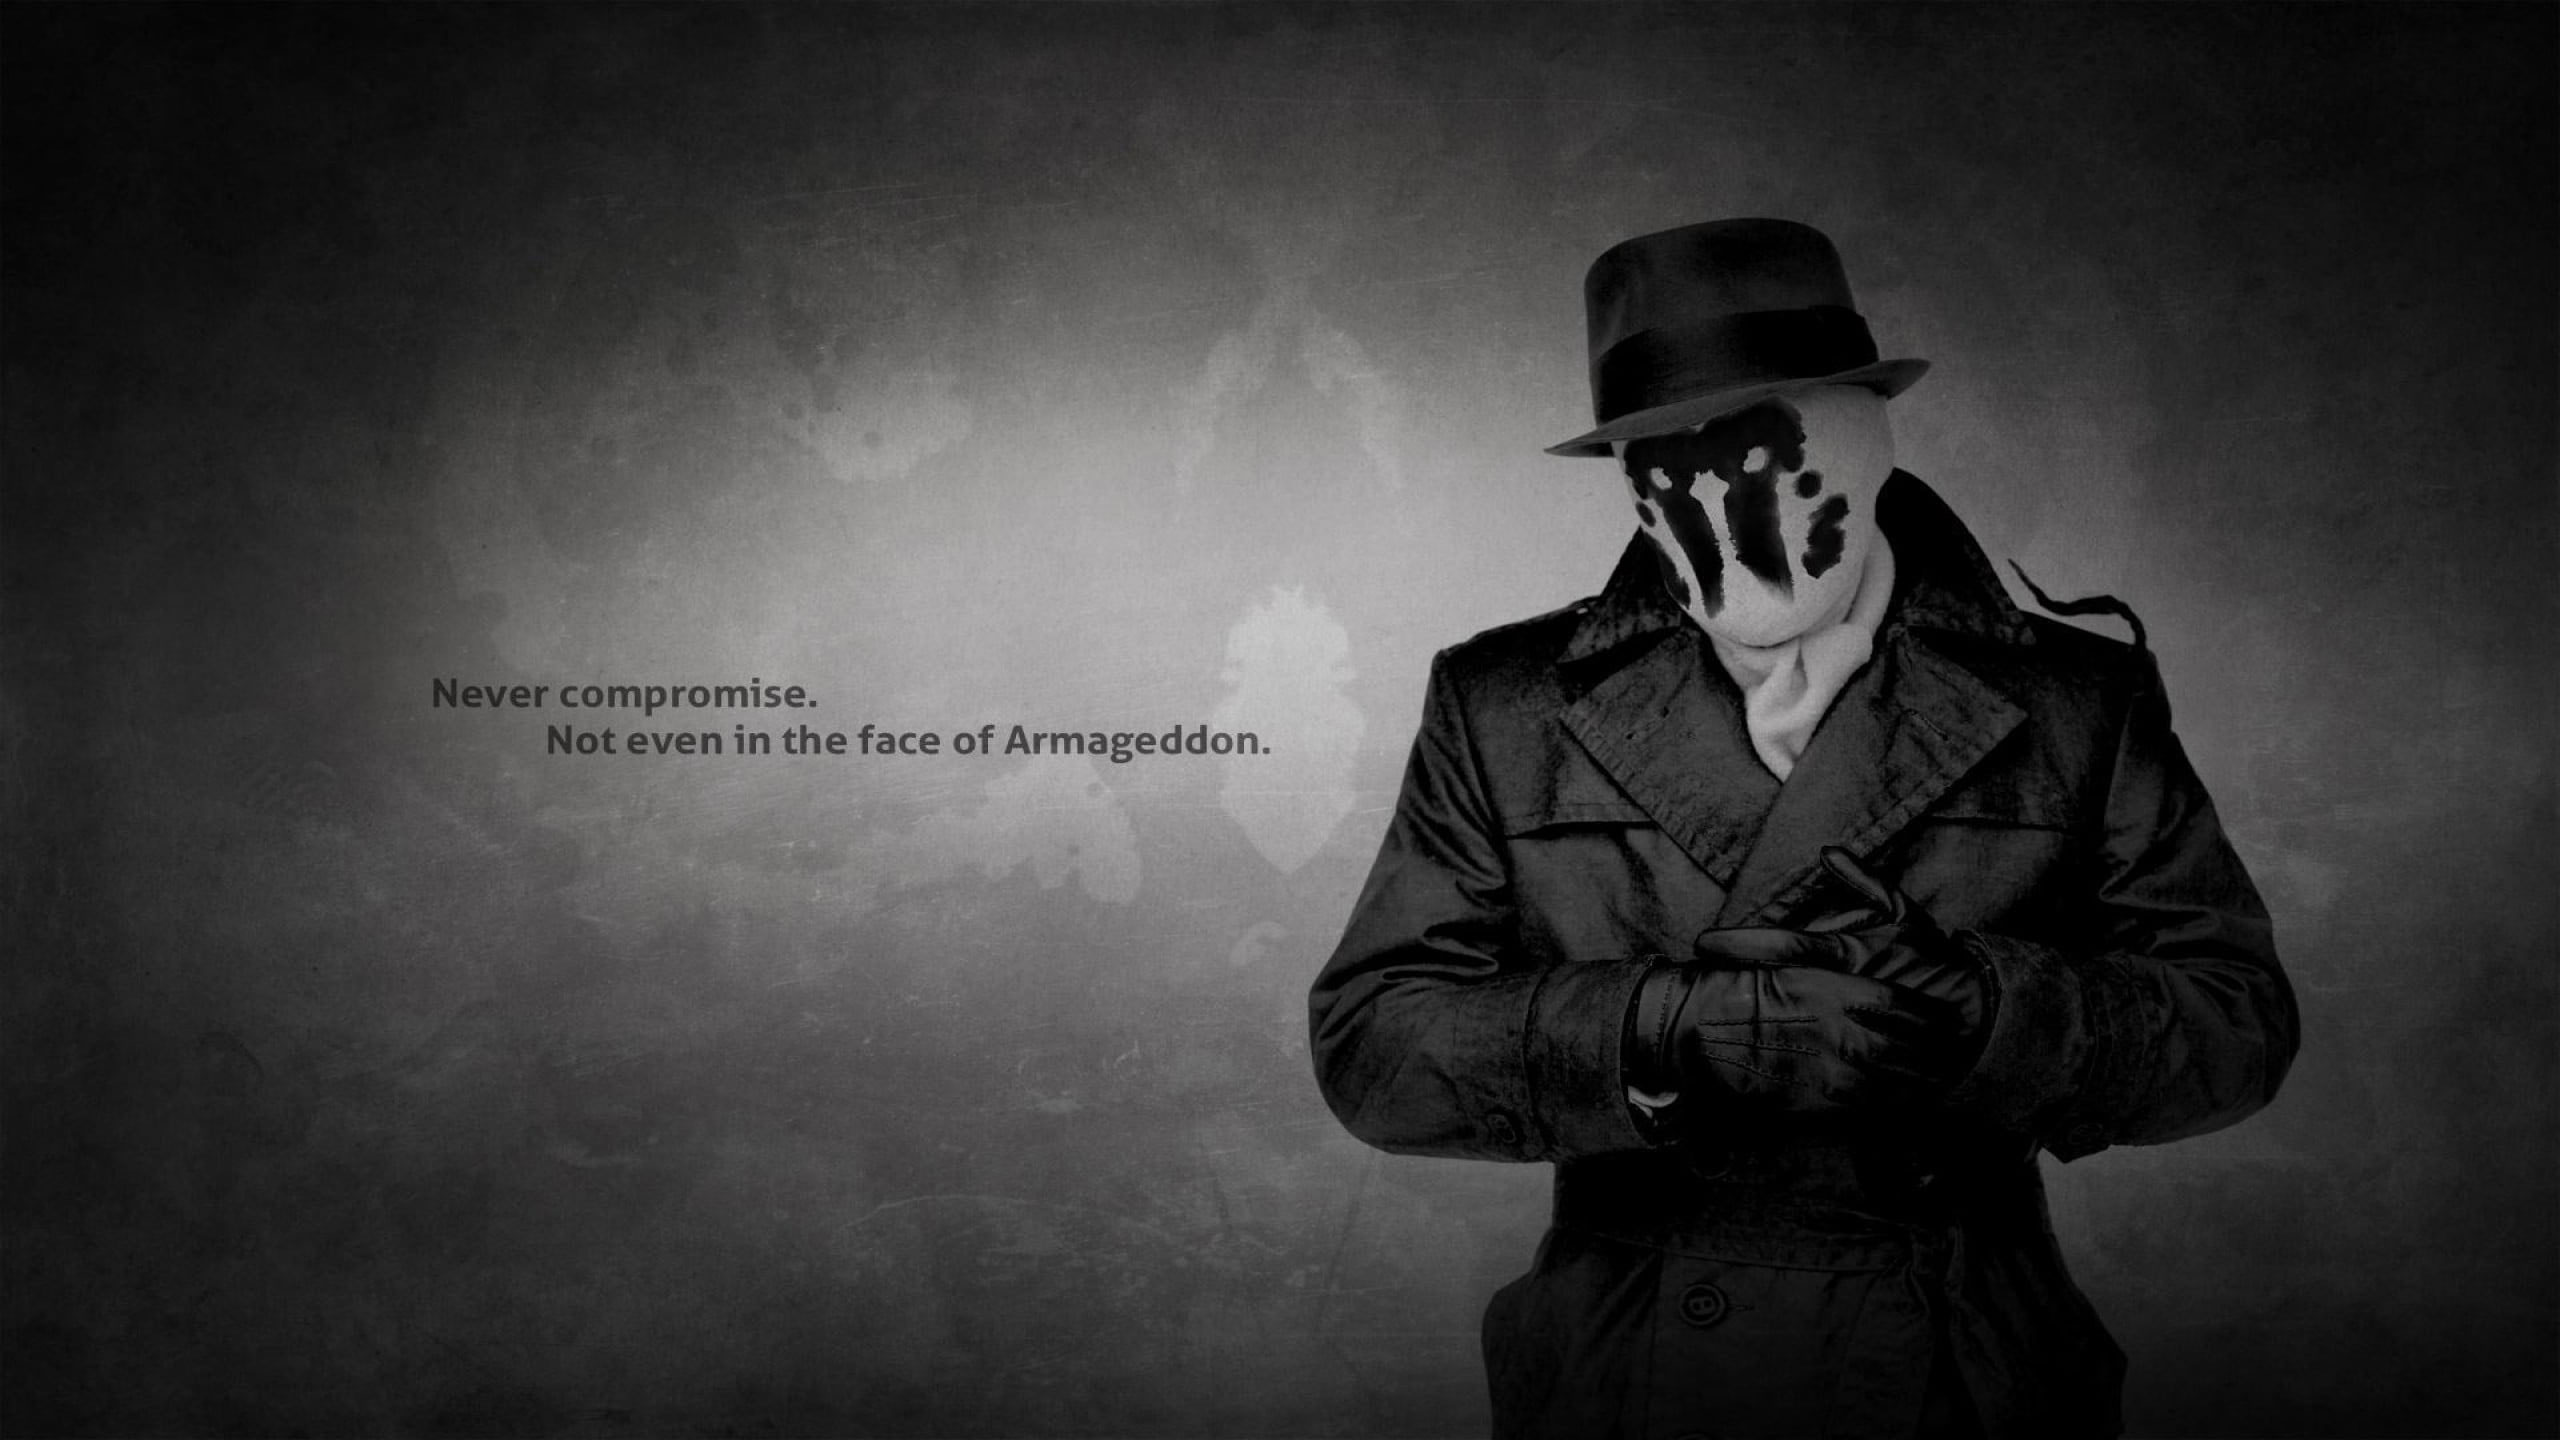 Black hat wallpaper, Watchmen, quote, Rorschach, movies, clothing, one person